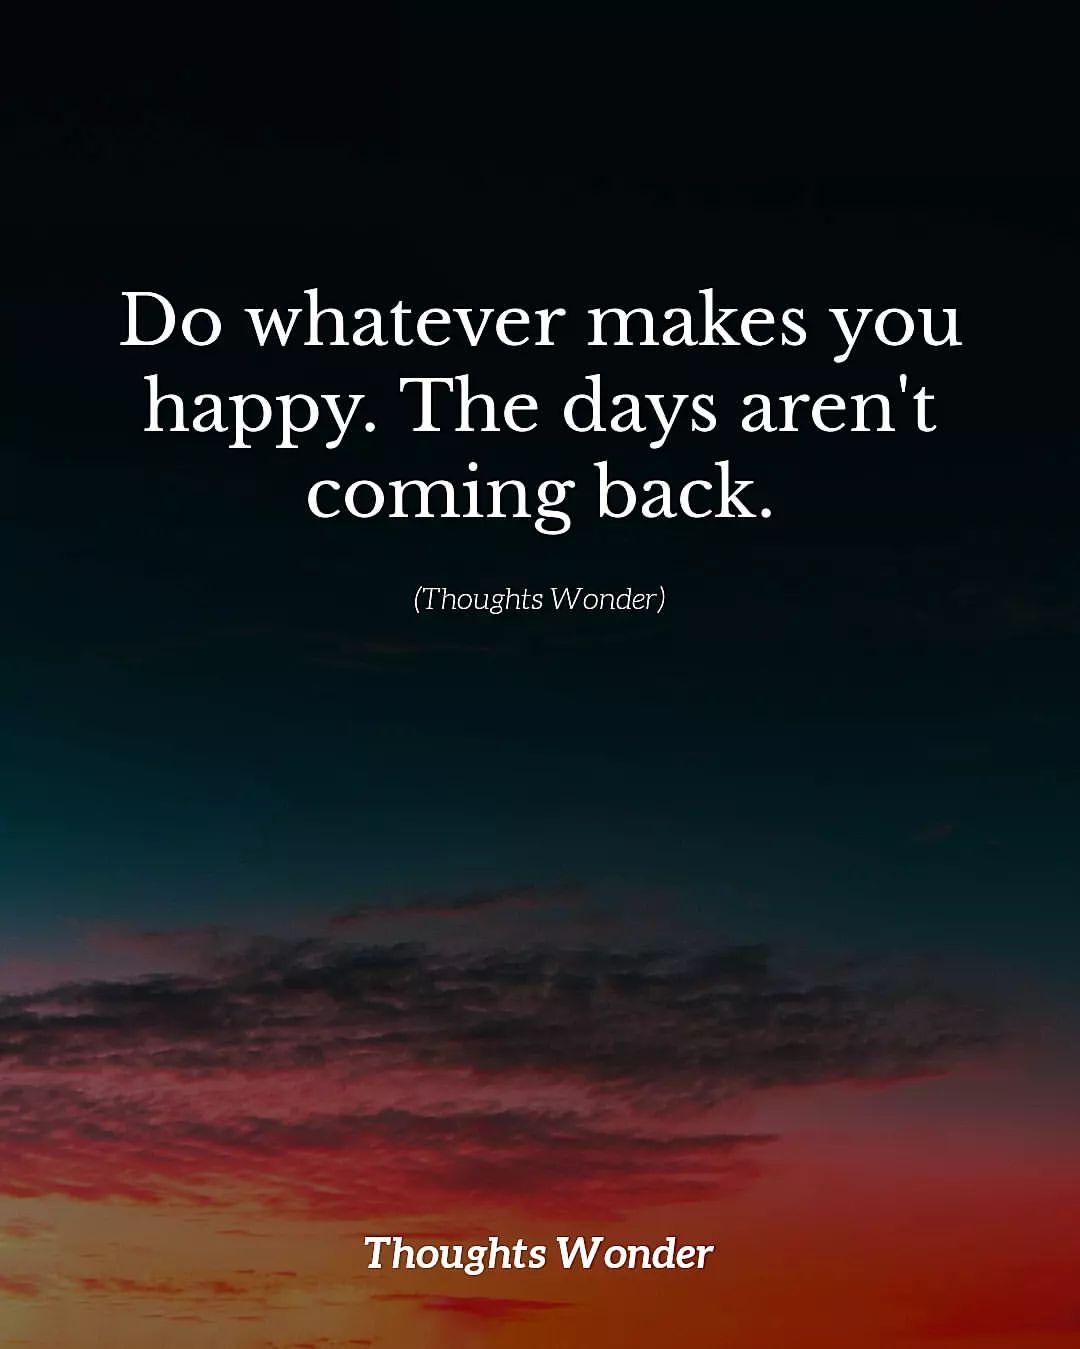 Do whatever makes you happy. The days aren't coming back.